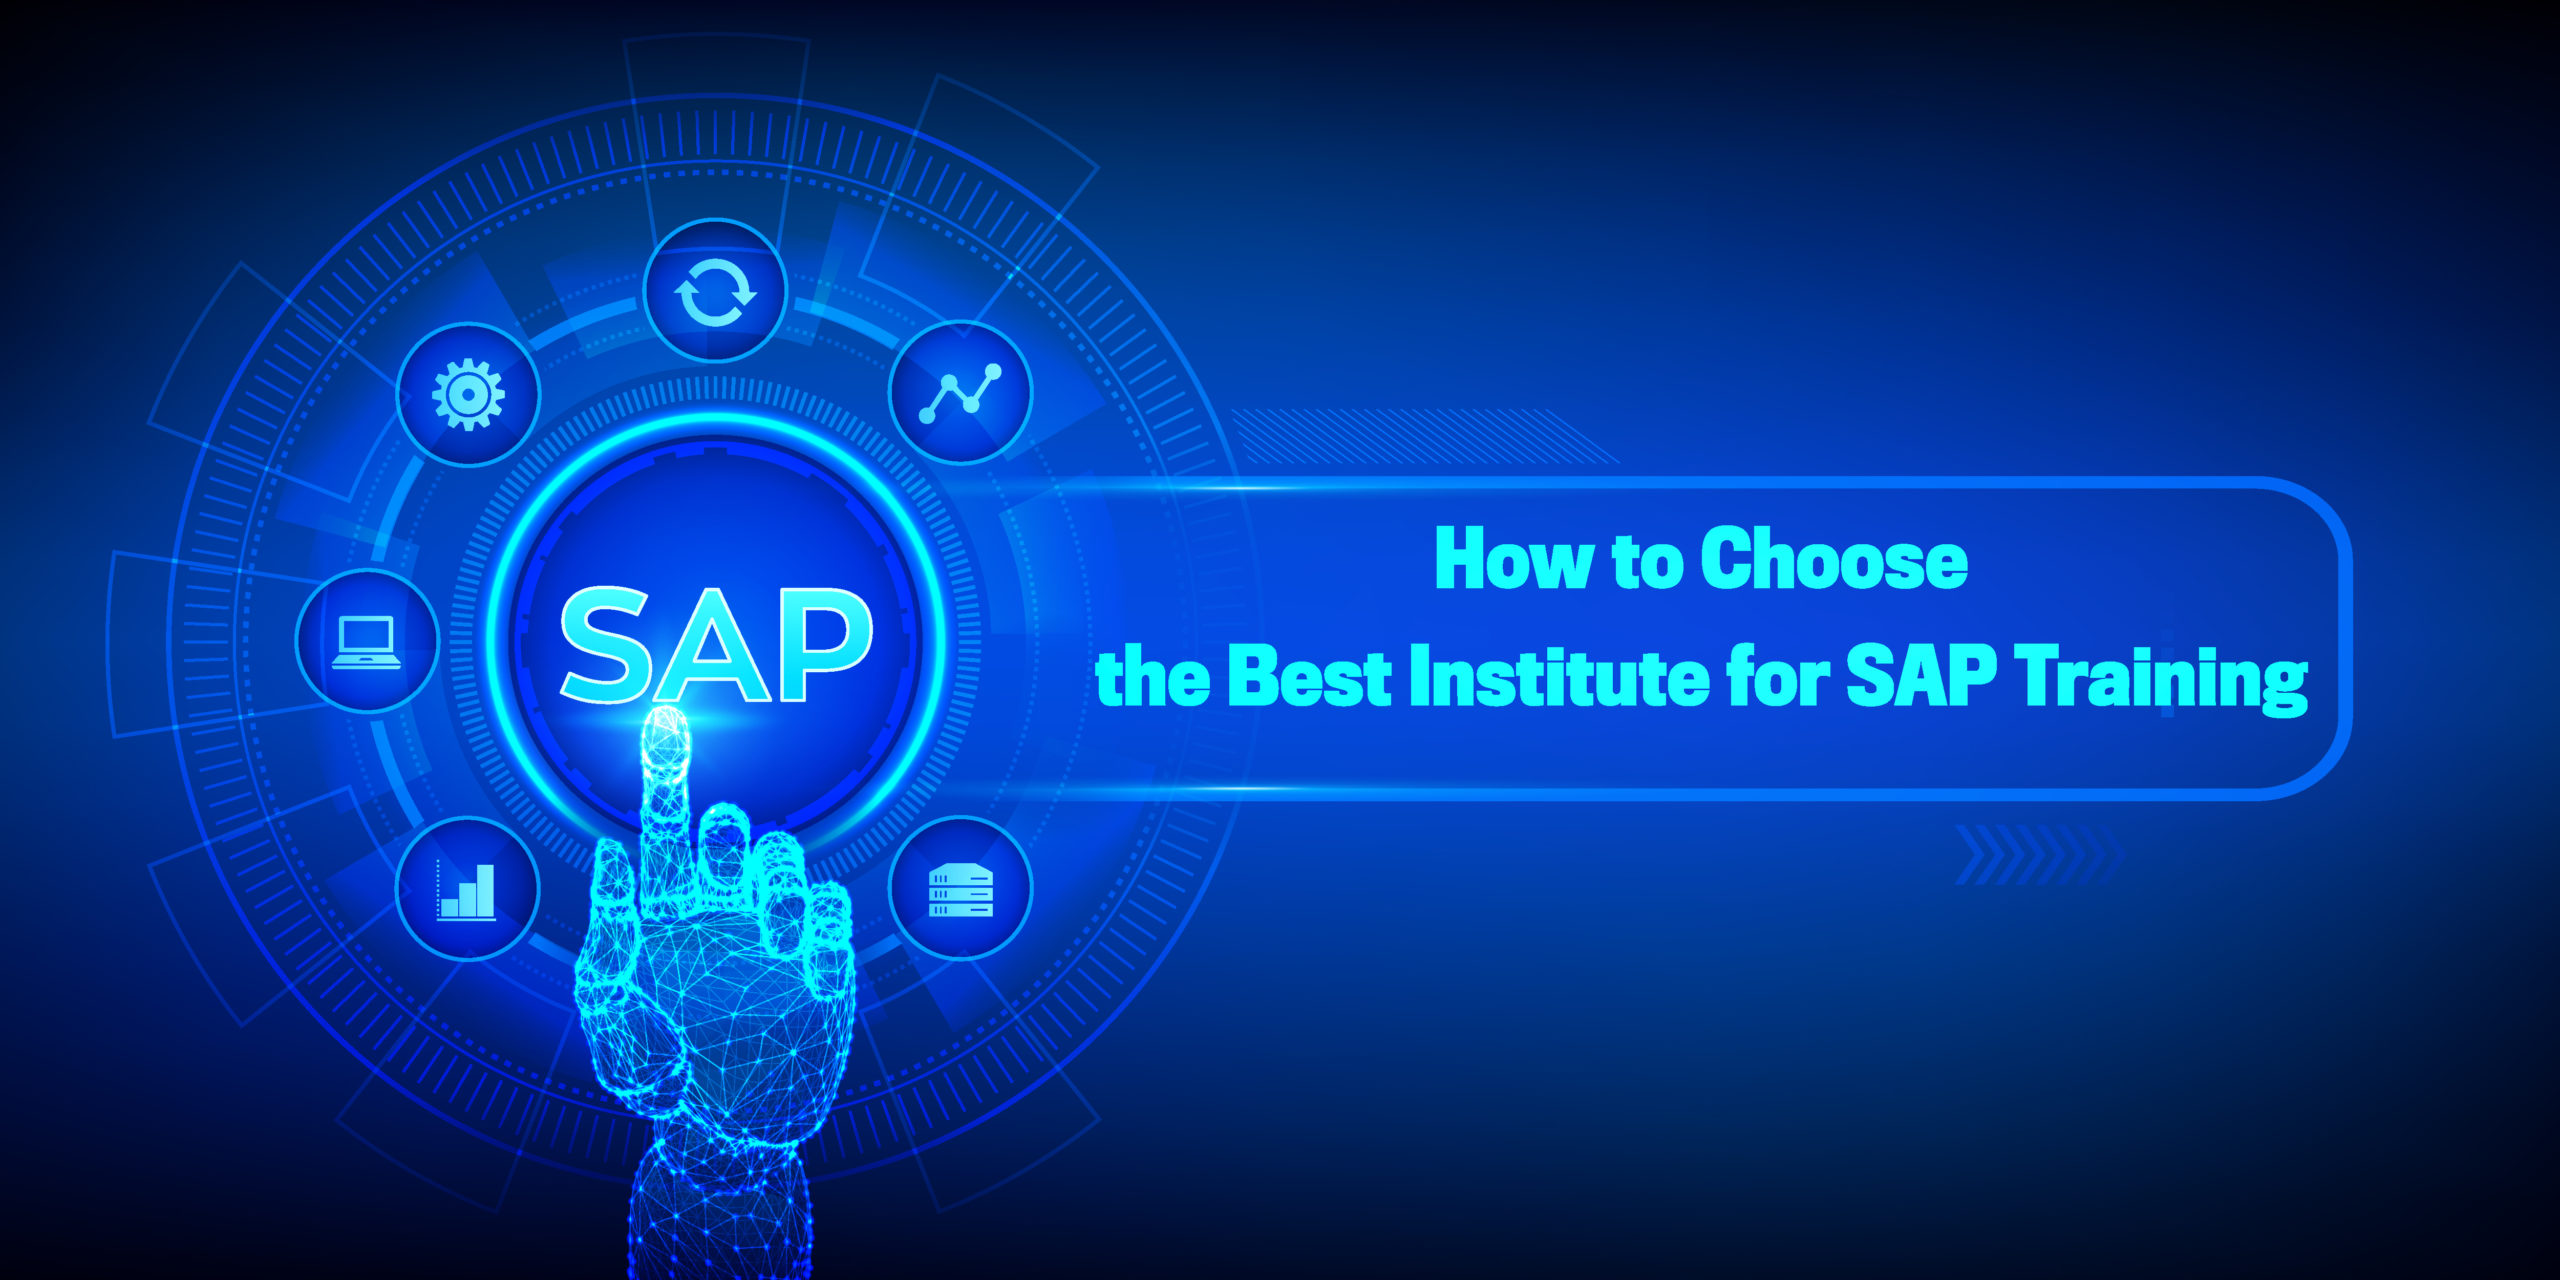 How to choose the best institute for SAP Training